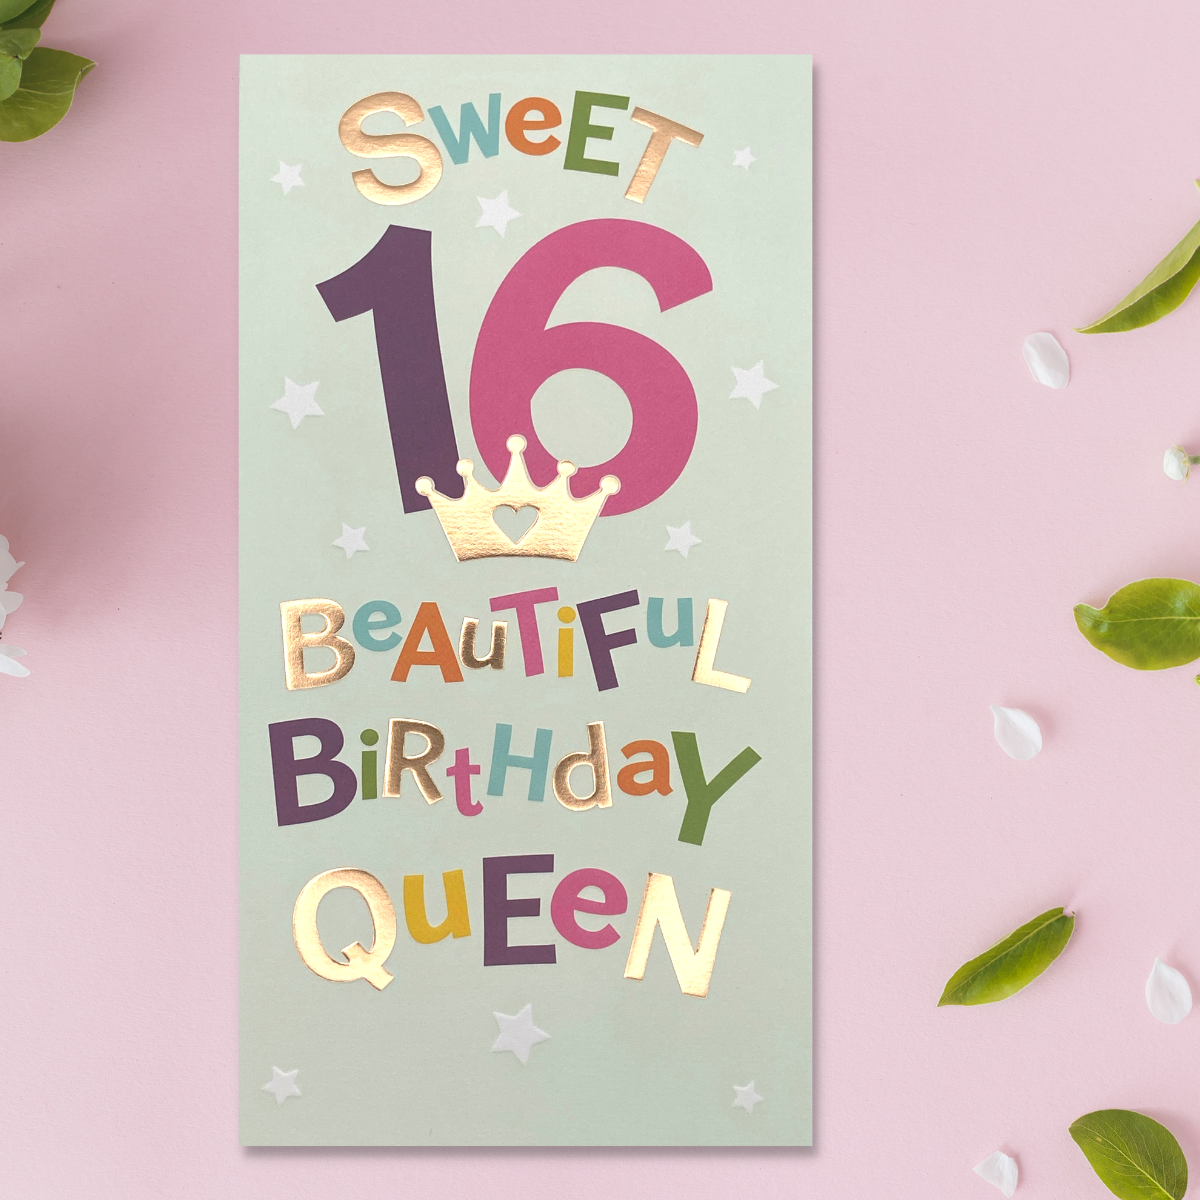 Slim card with multicolour text and rose gold crown